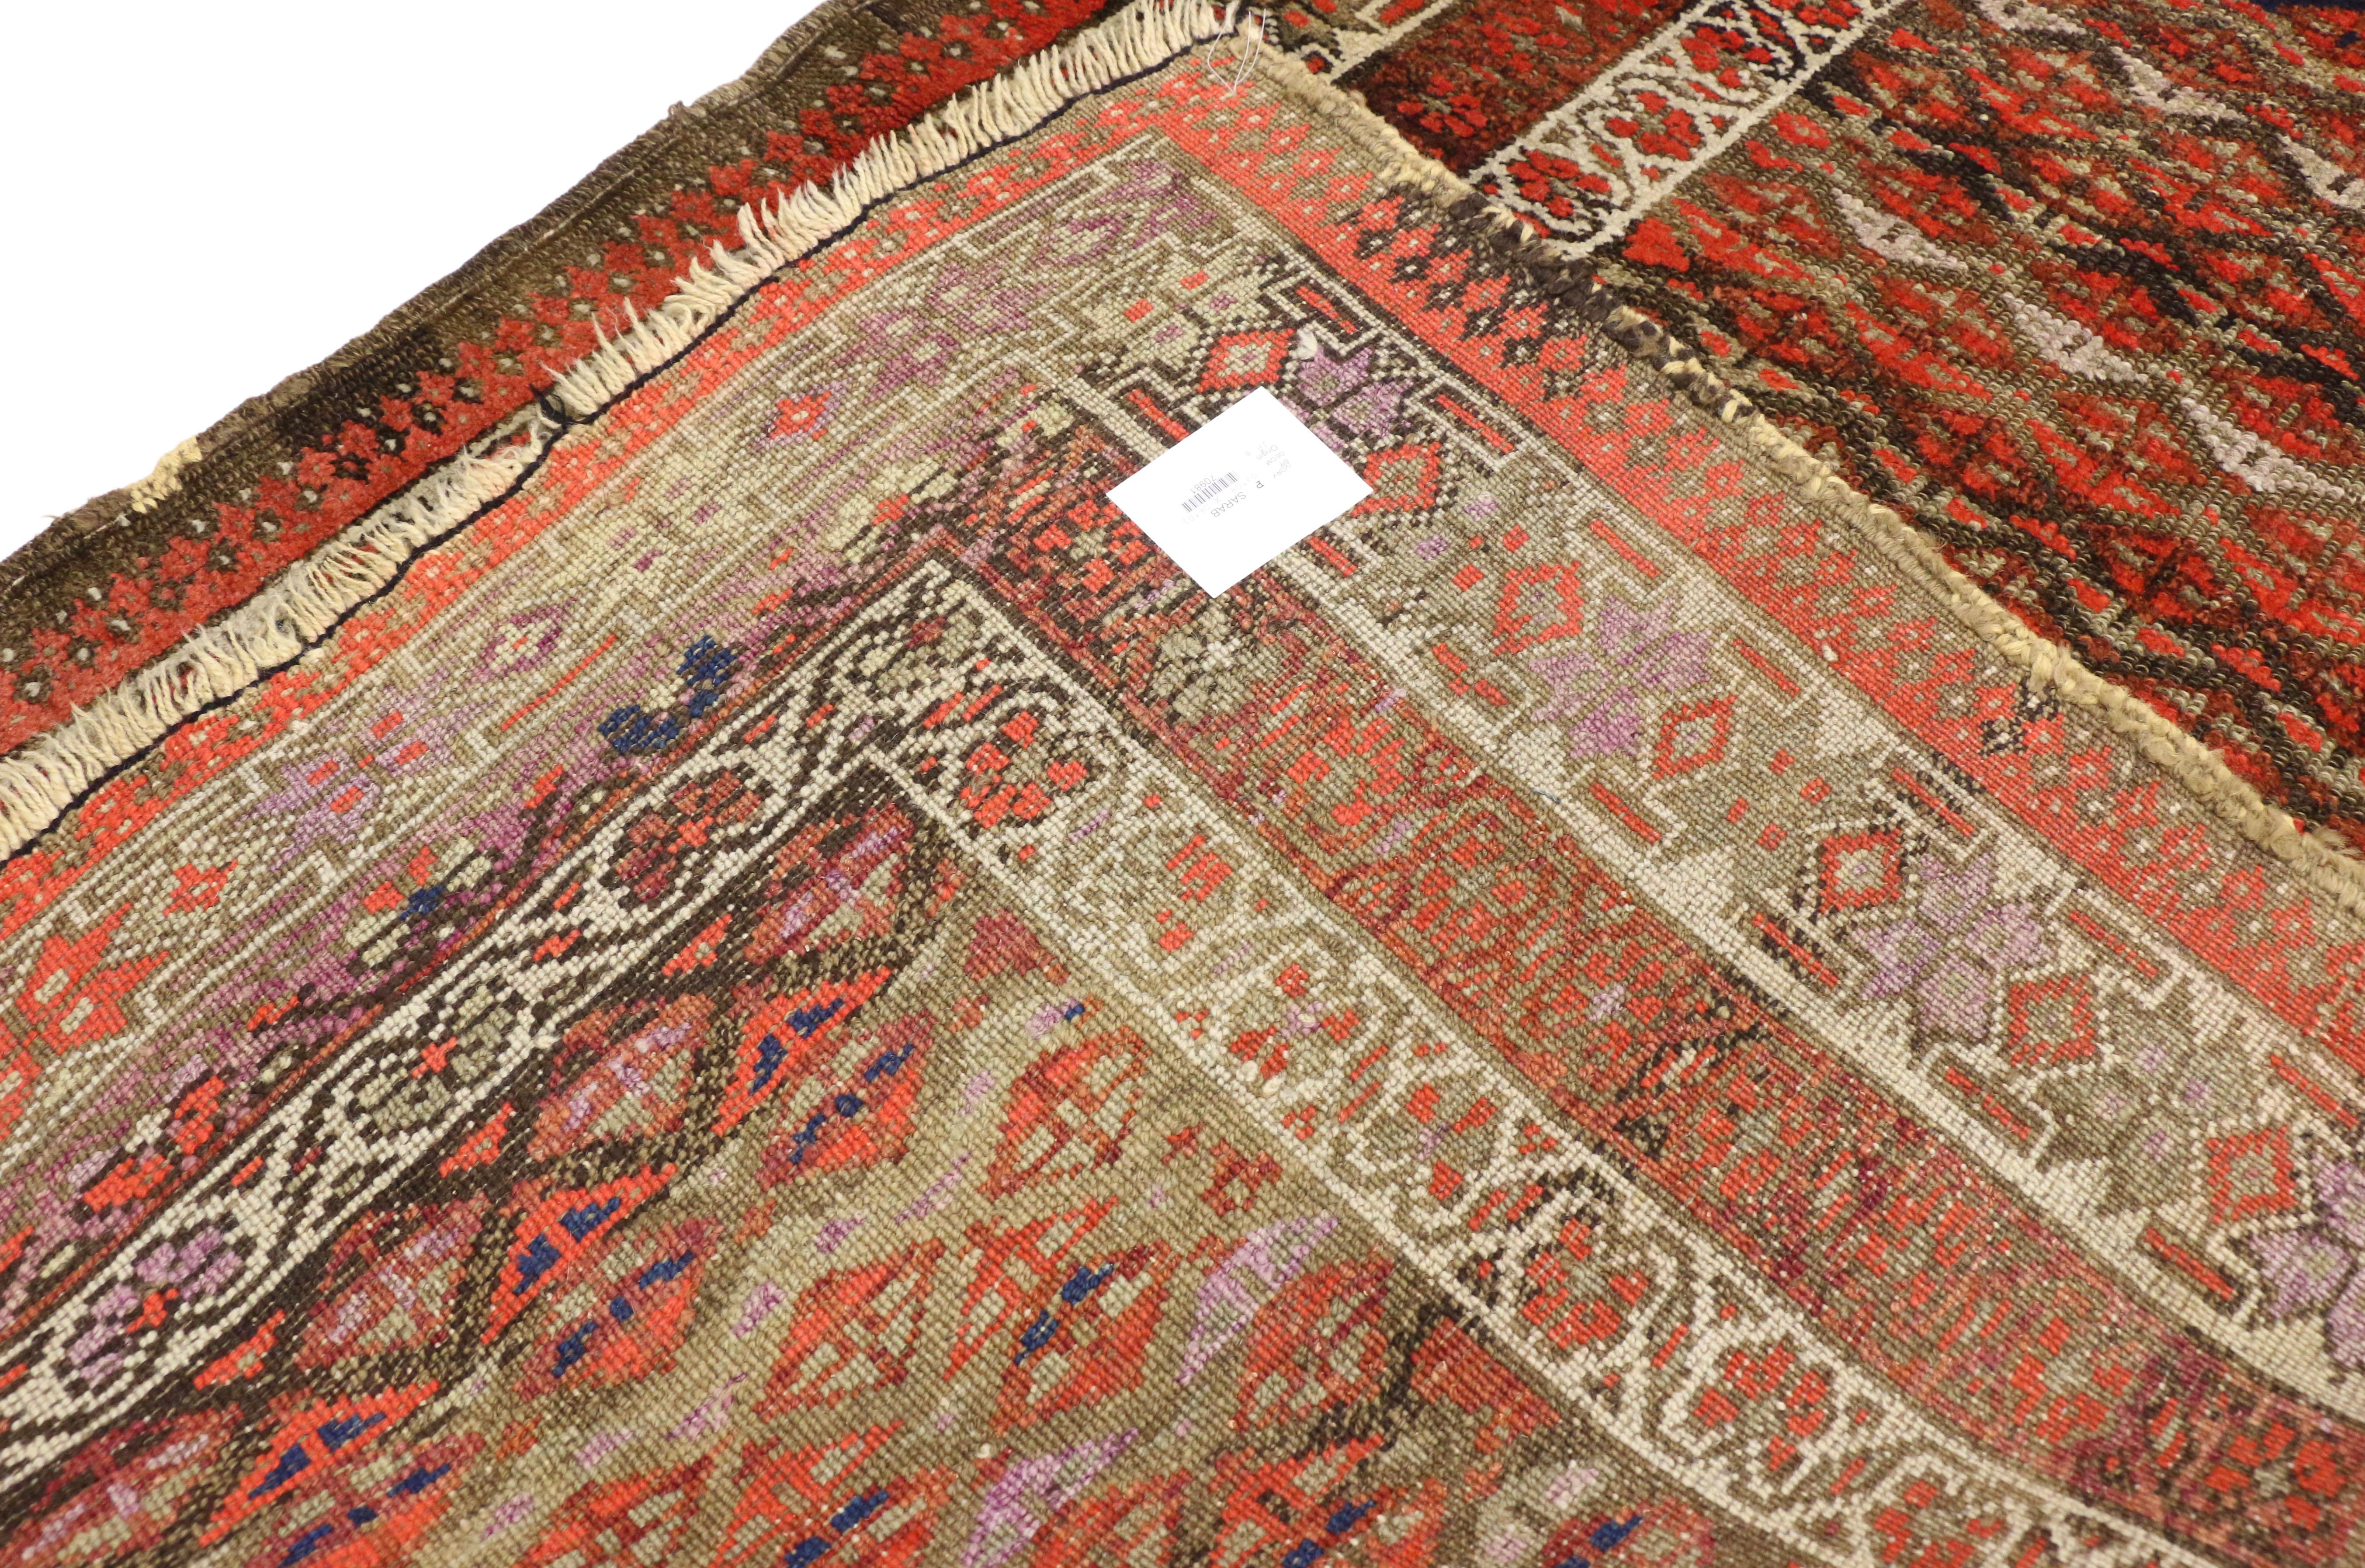 Antique Persian Sarab Rug with Rustic Arts & Craft Style In Good Condition For Sale In Dallas, TX